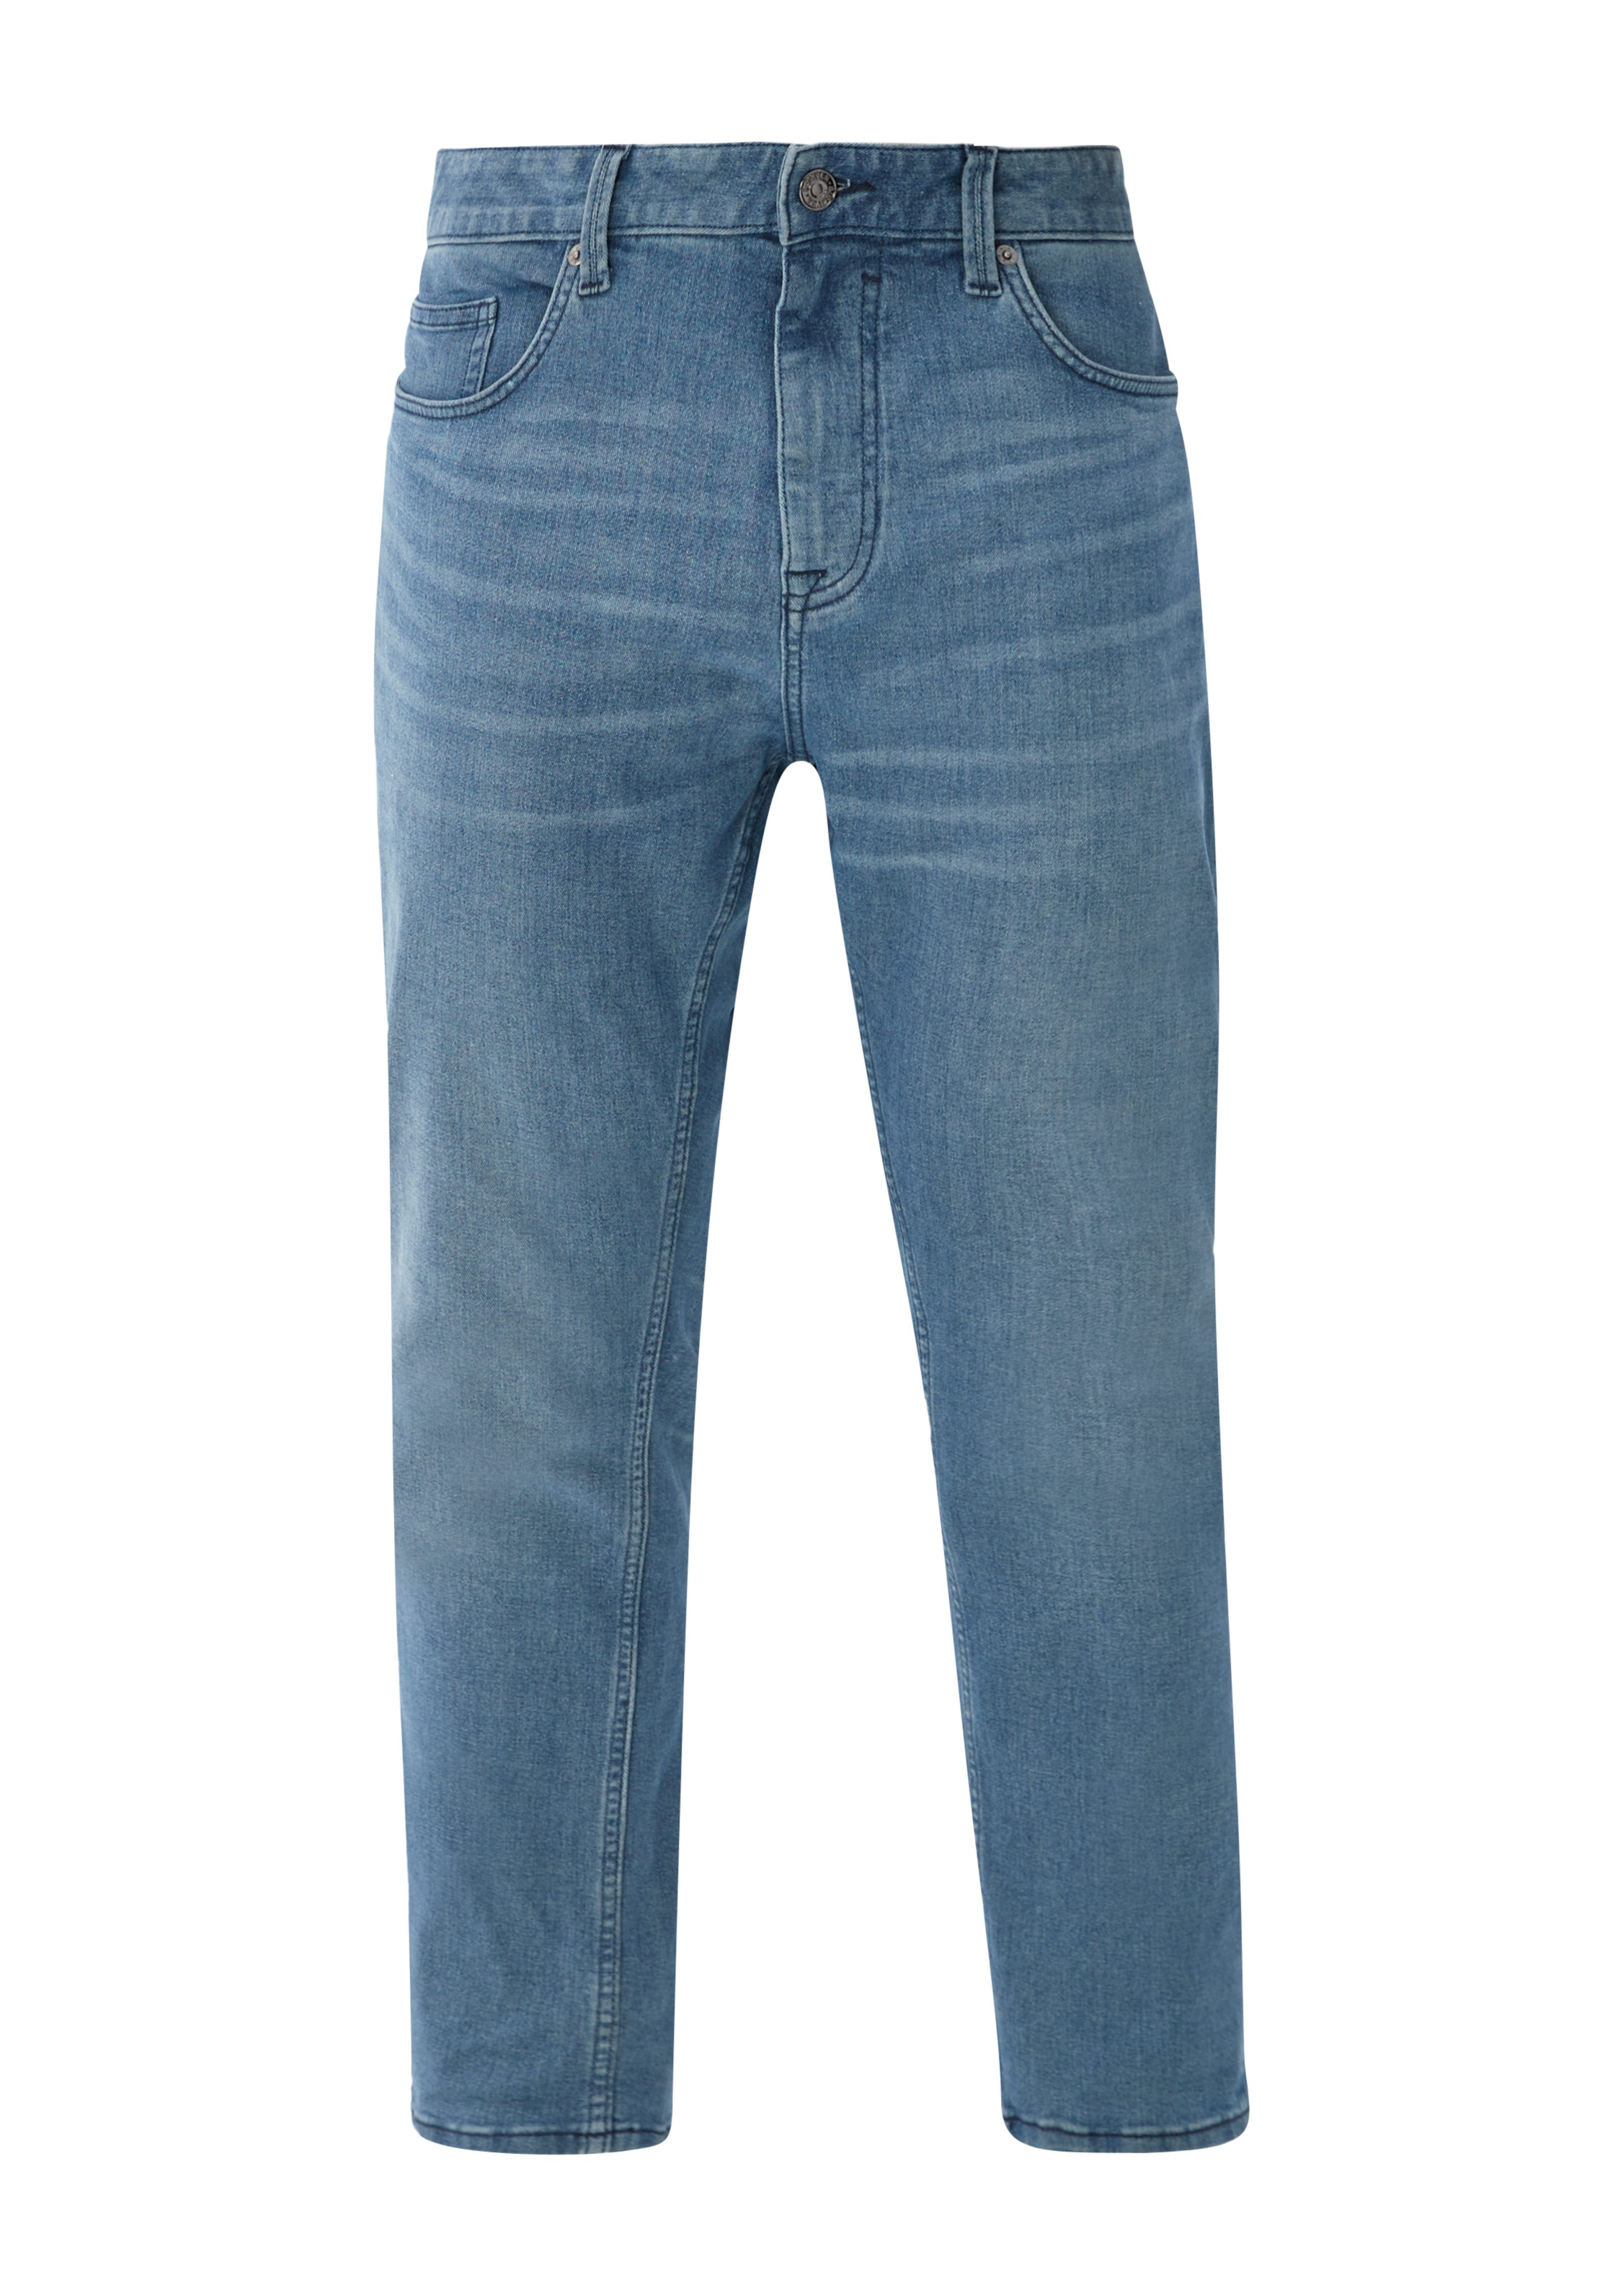 Jeans s.Oliver Relaxed hellblau Leg Mid / / Destroyes Fit Stoffhose Casby Straight Rise /